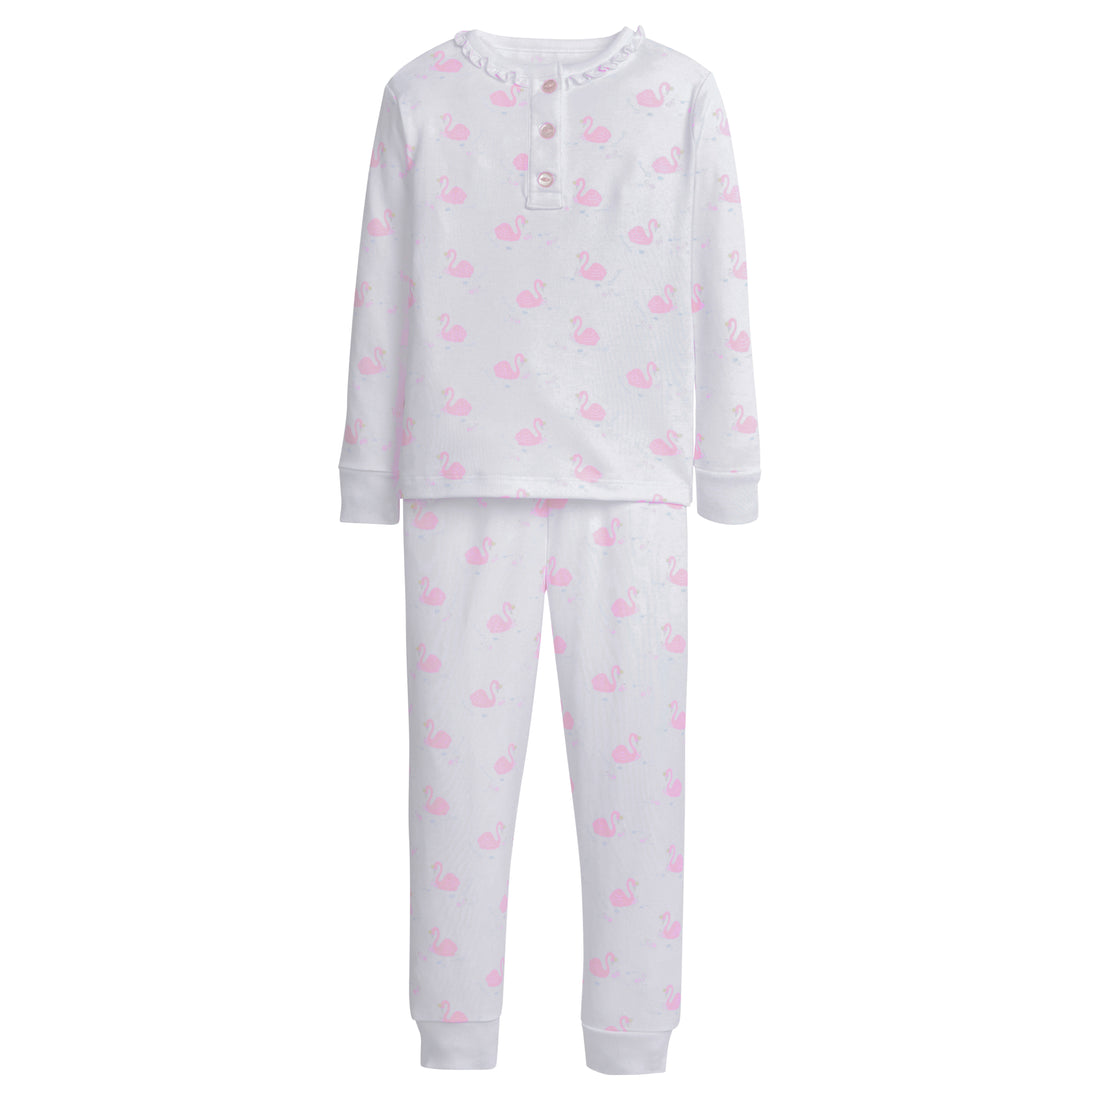 little english classic childrens clothing girls printed pajamas with pink swans and ruffled collar